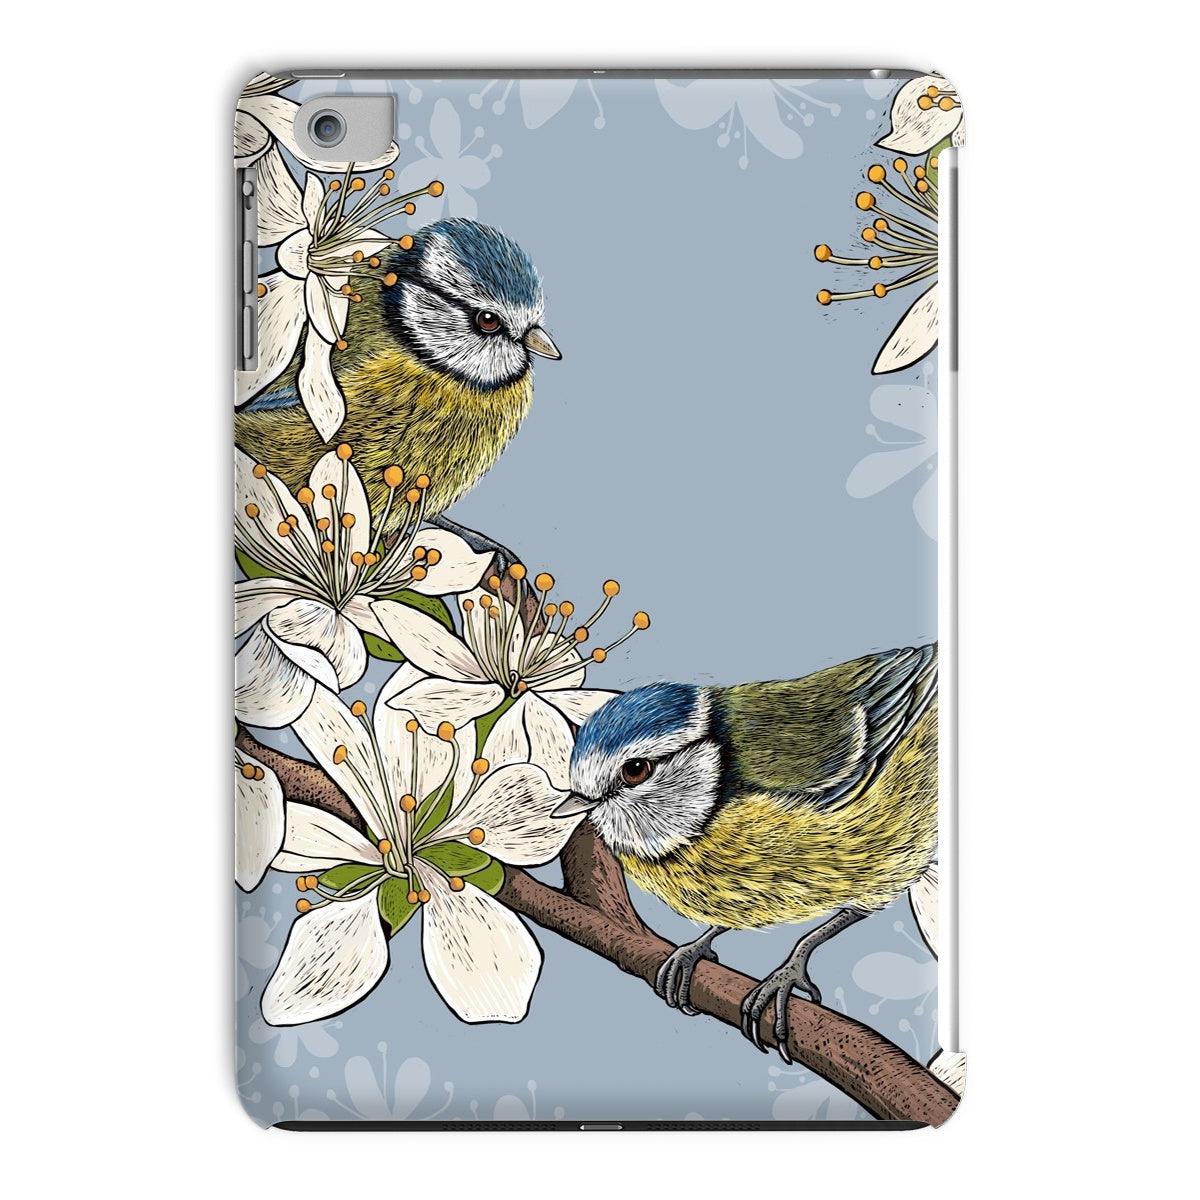 Hedgerow Blue Tits tablet case, designed by Fox and Boo